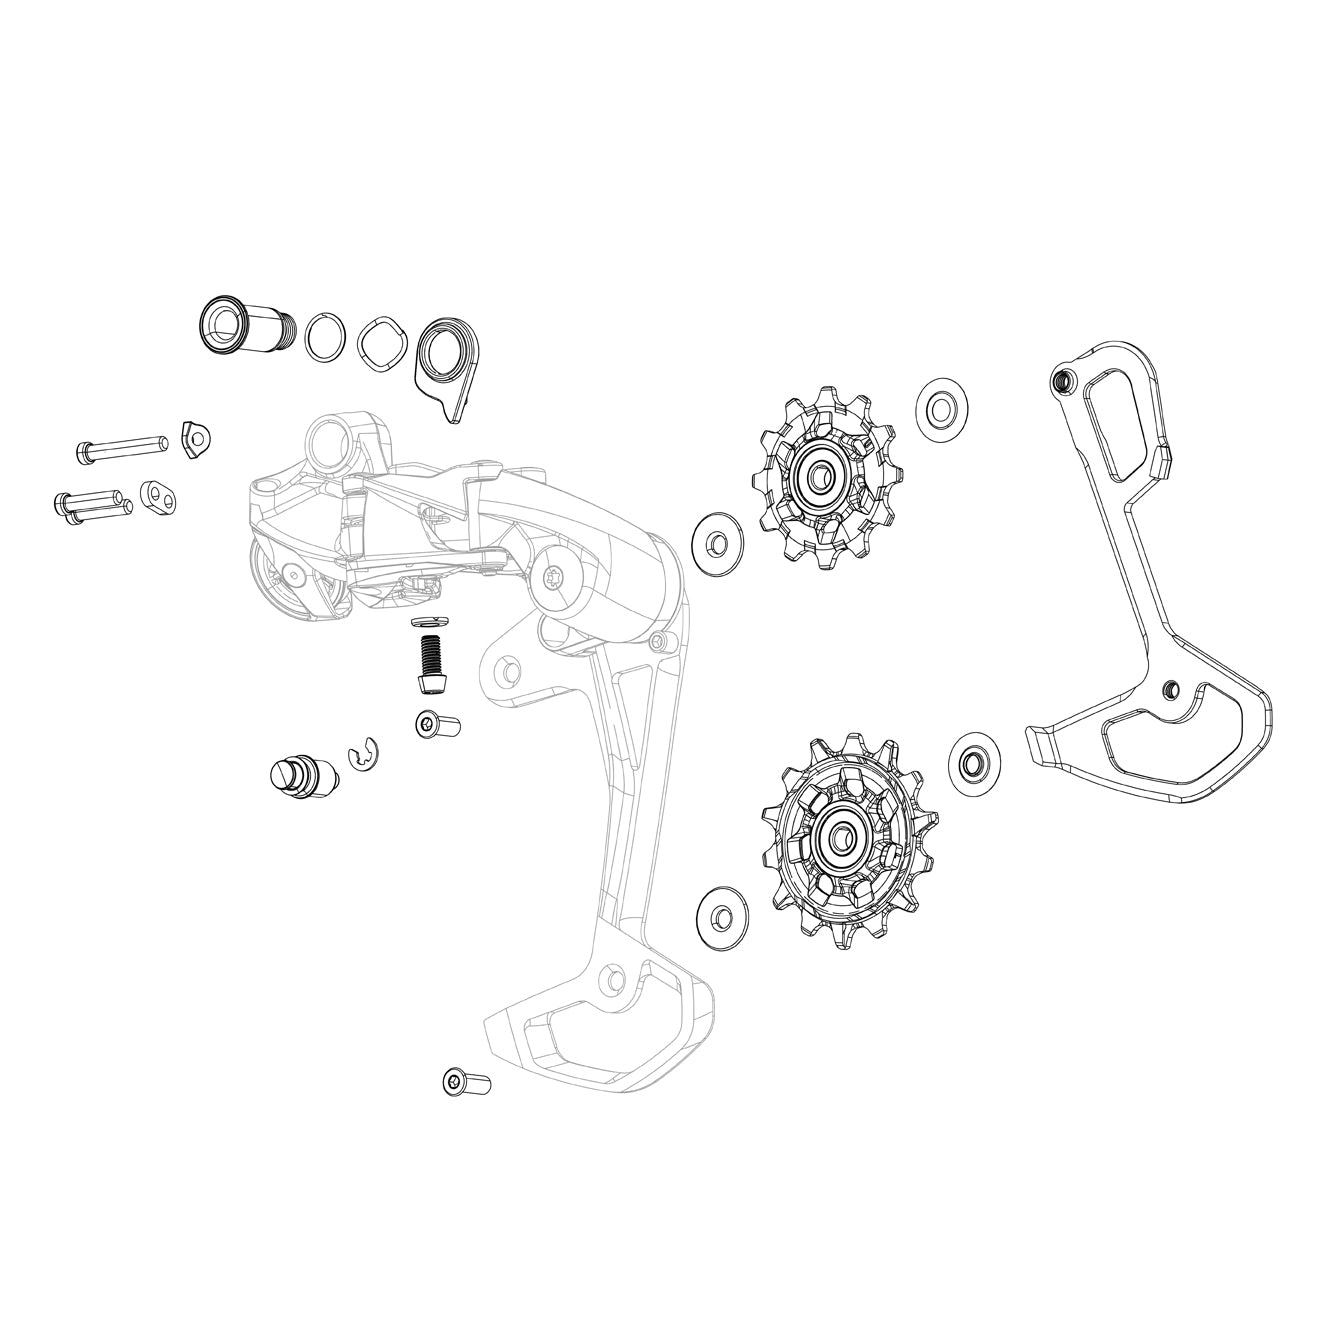 SRAM Rear Derailleur Pulley Kit XXSL Eagle T-Type AXS (Includes 14T Upper And 16T Lower Metal Spider Pulley, 2 T25 Aluminum Pulley Bolts)